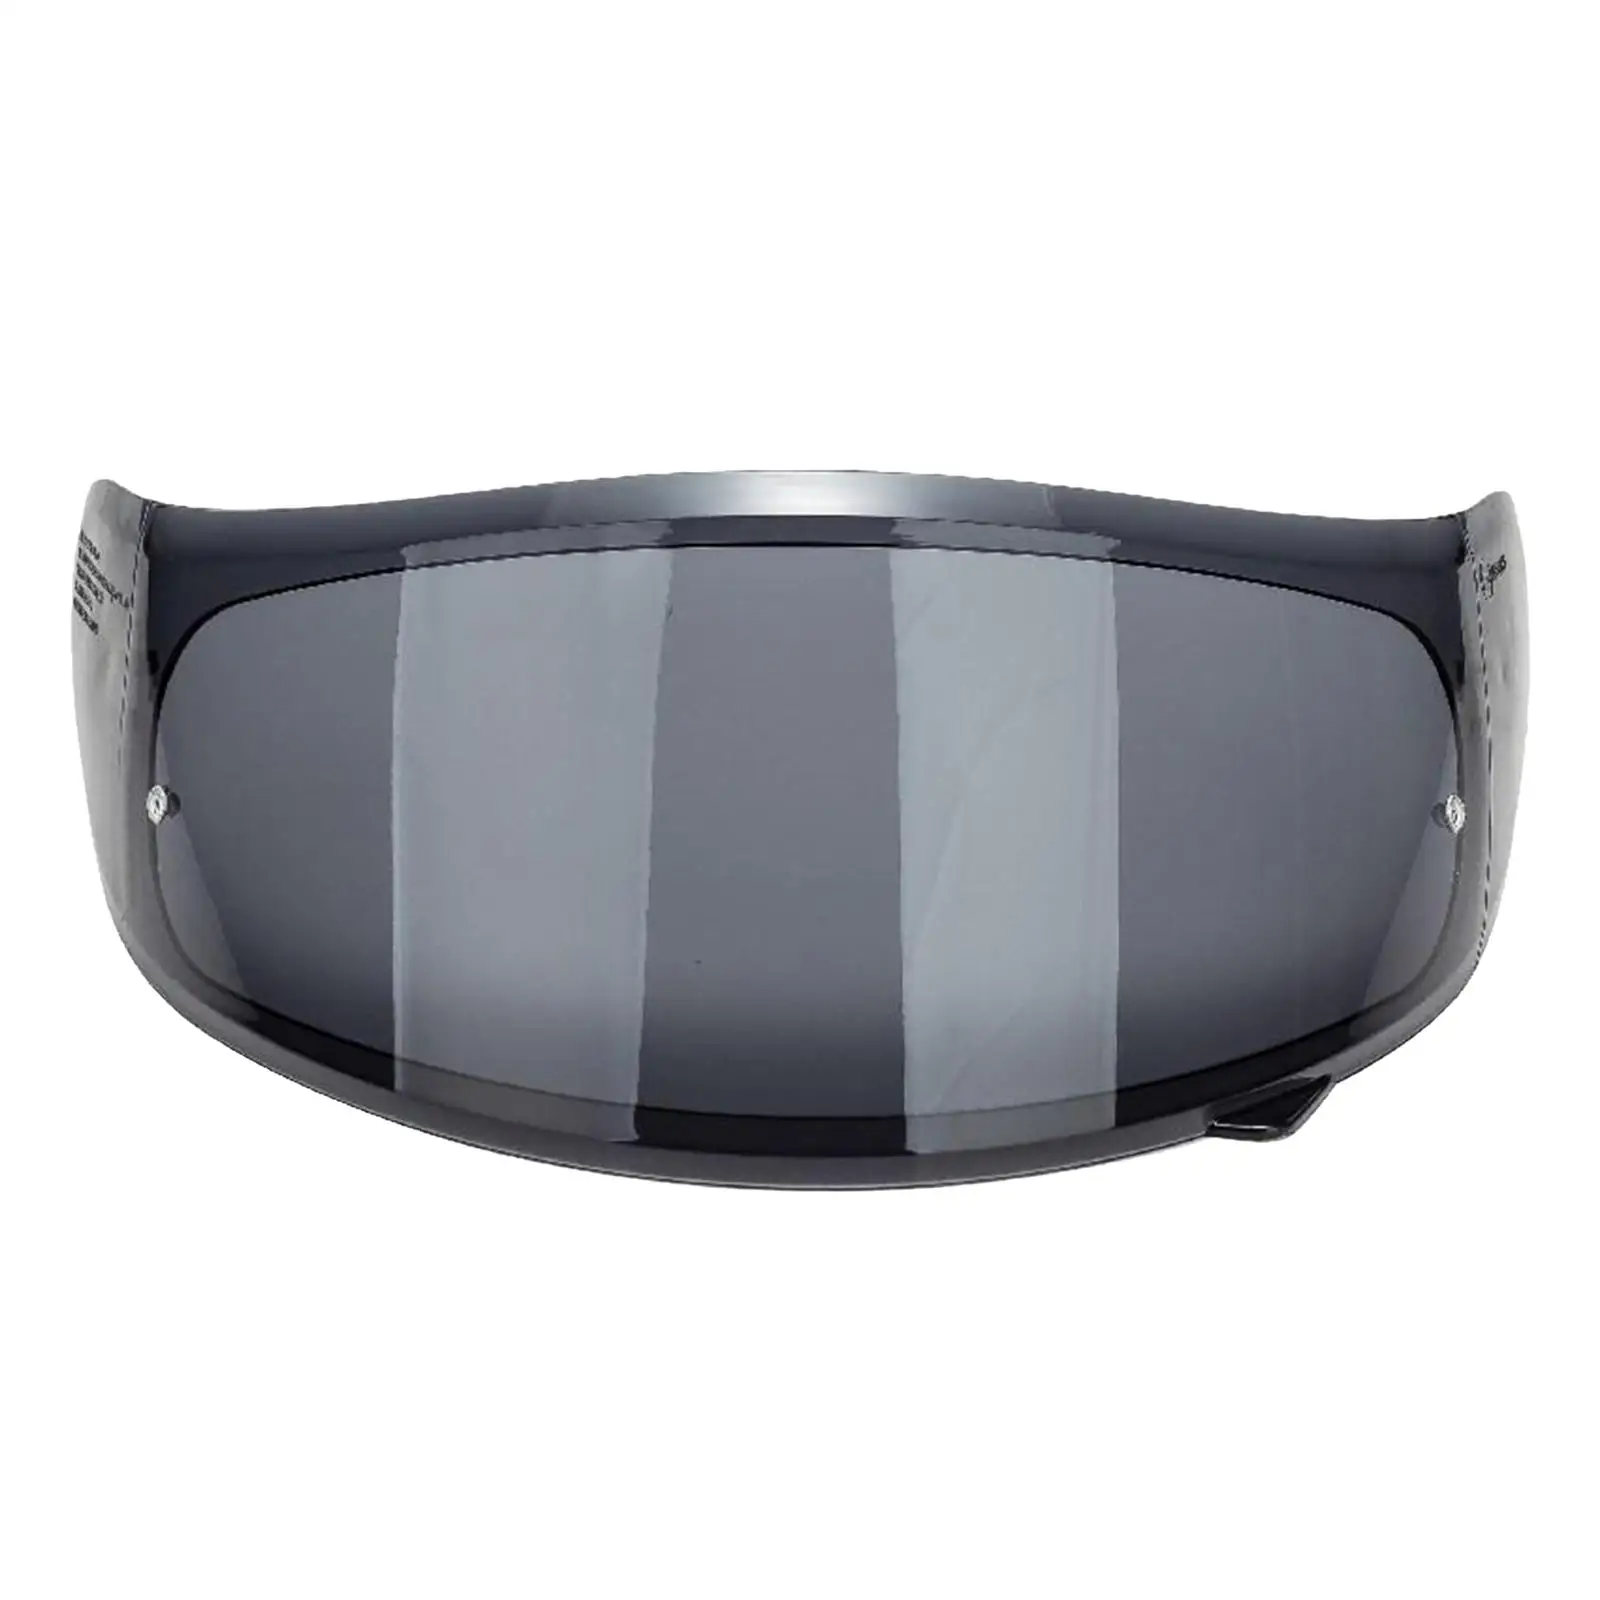 Full face motorcycle lens suitable for MT MT